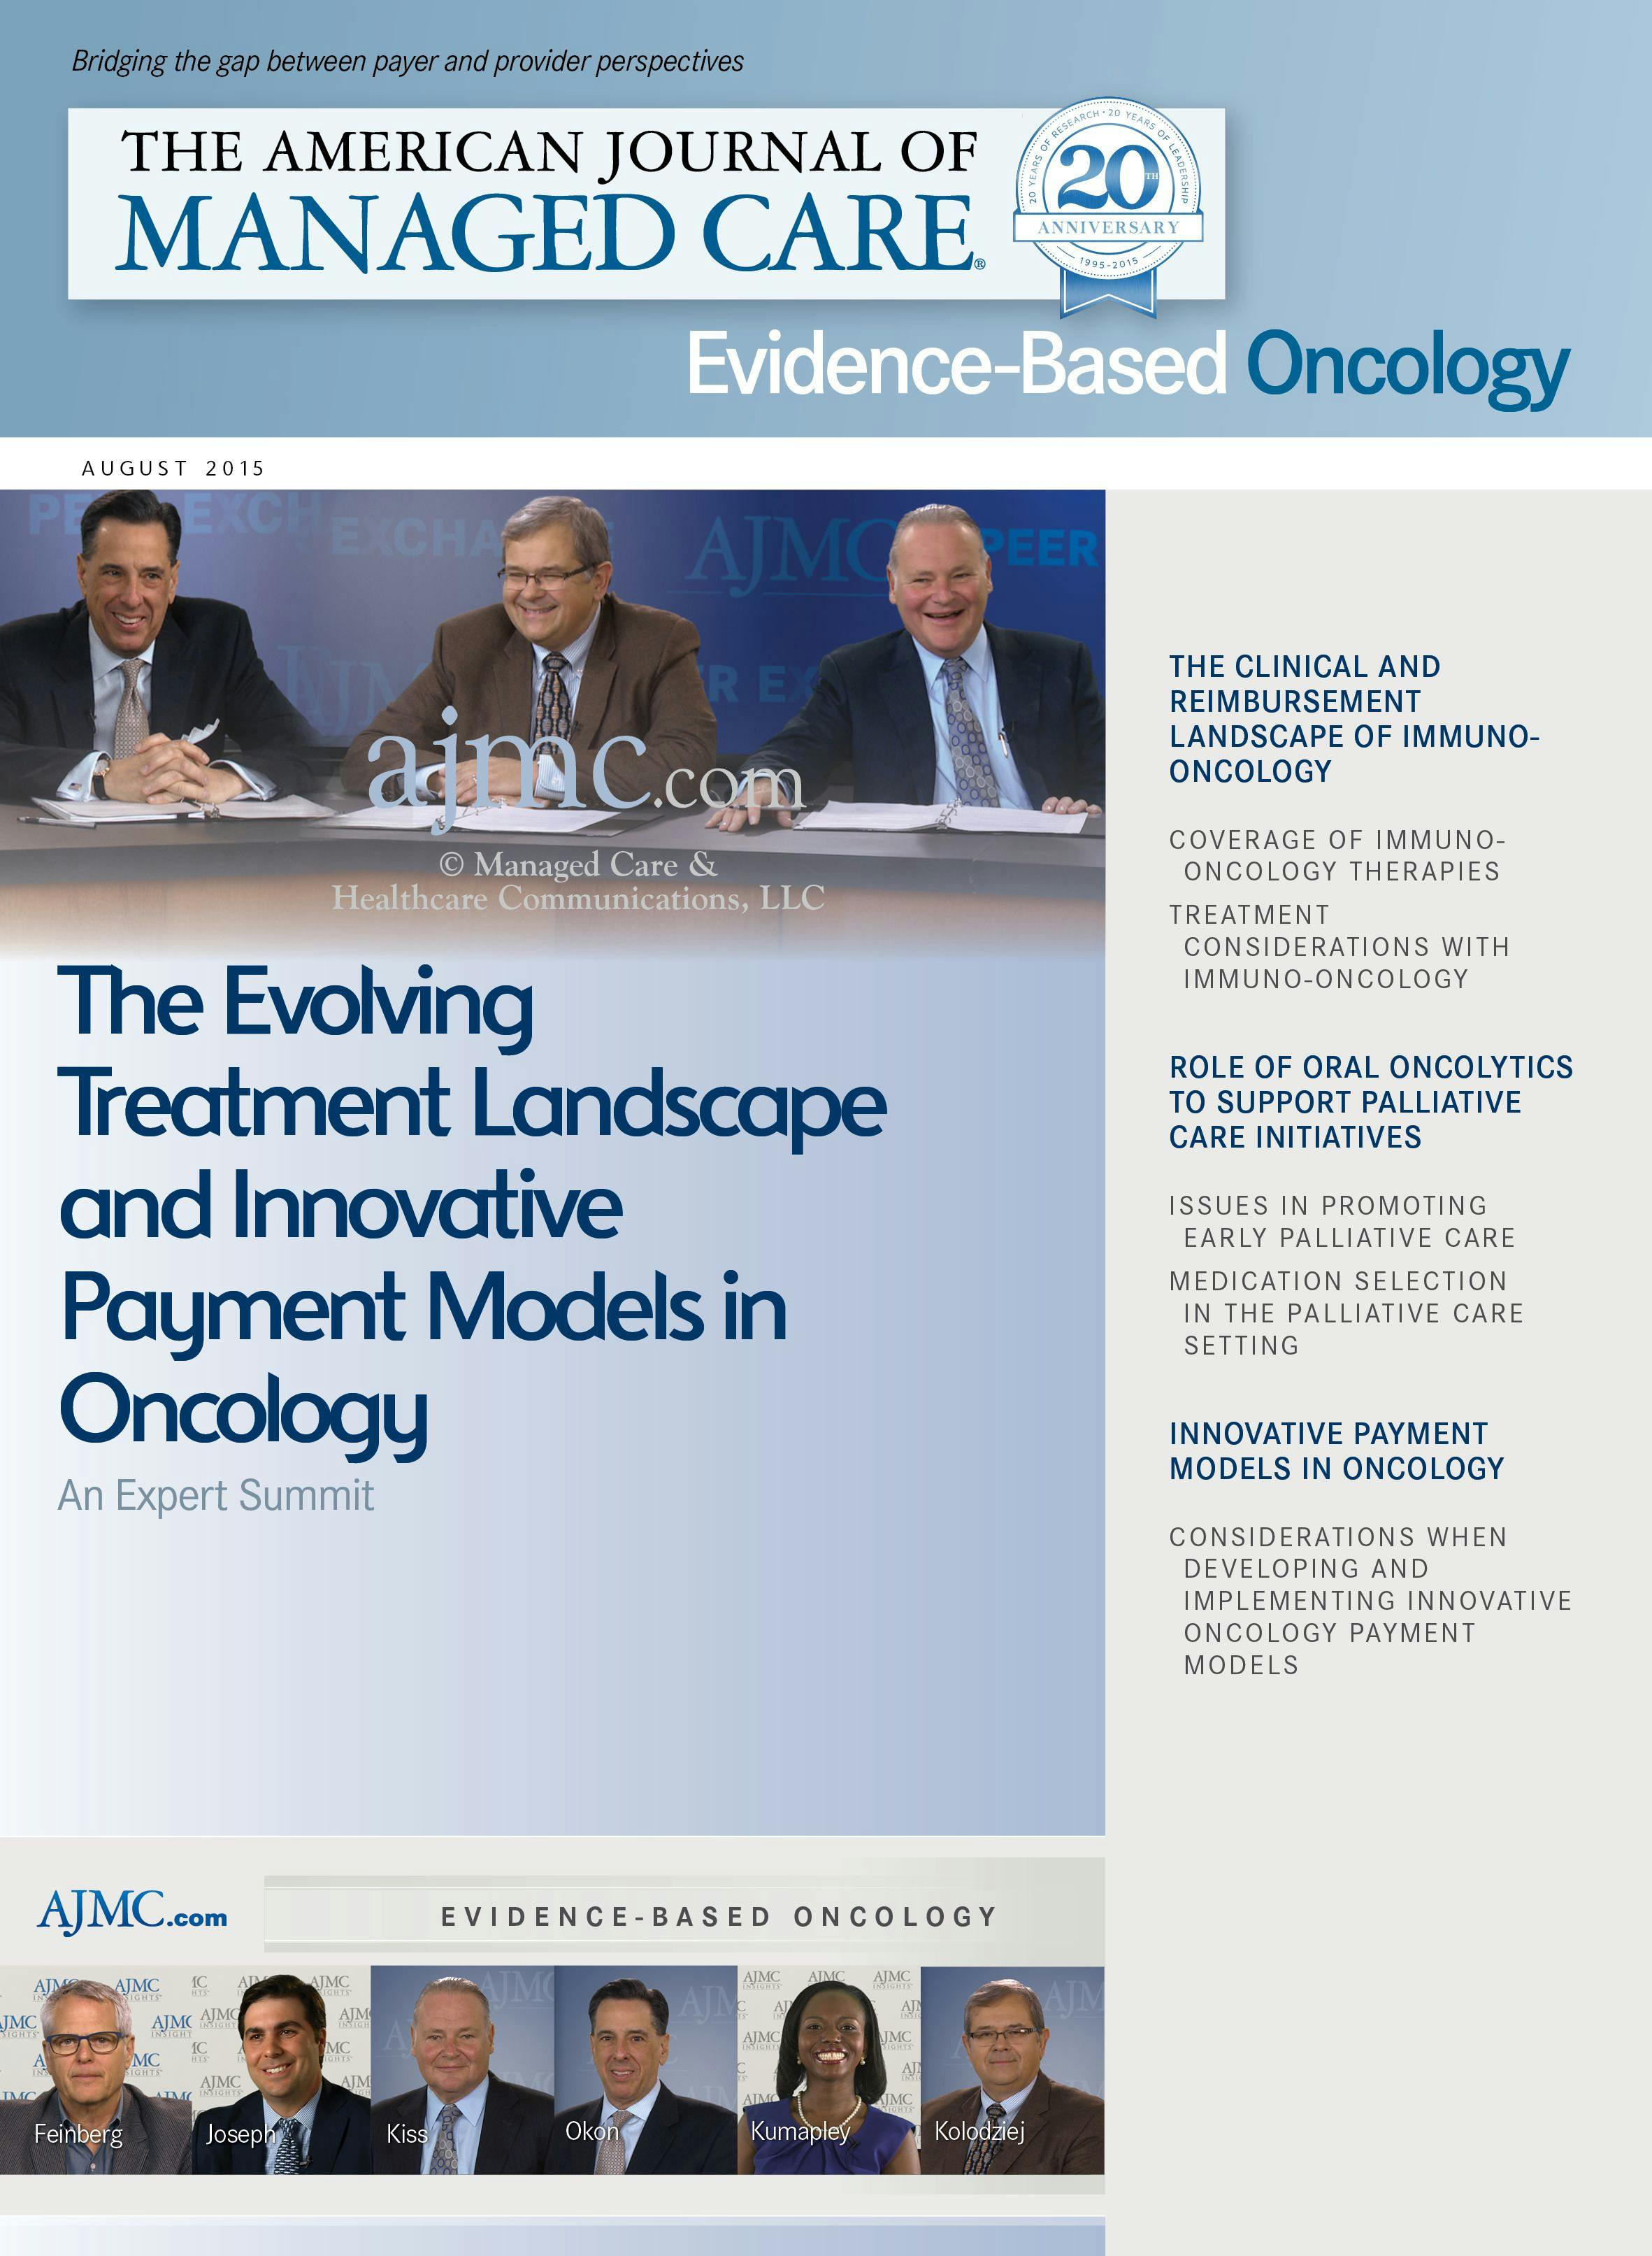 The Evolving Treatment Landscape and Innovative Payment Models in Oncology: An Expert Summit